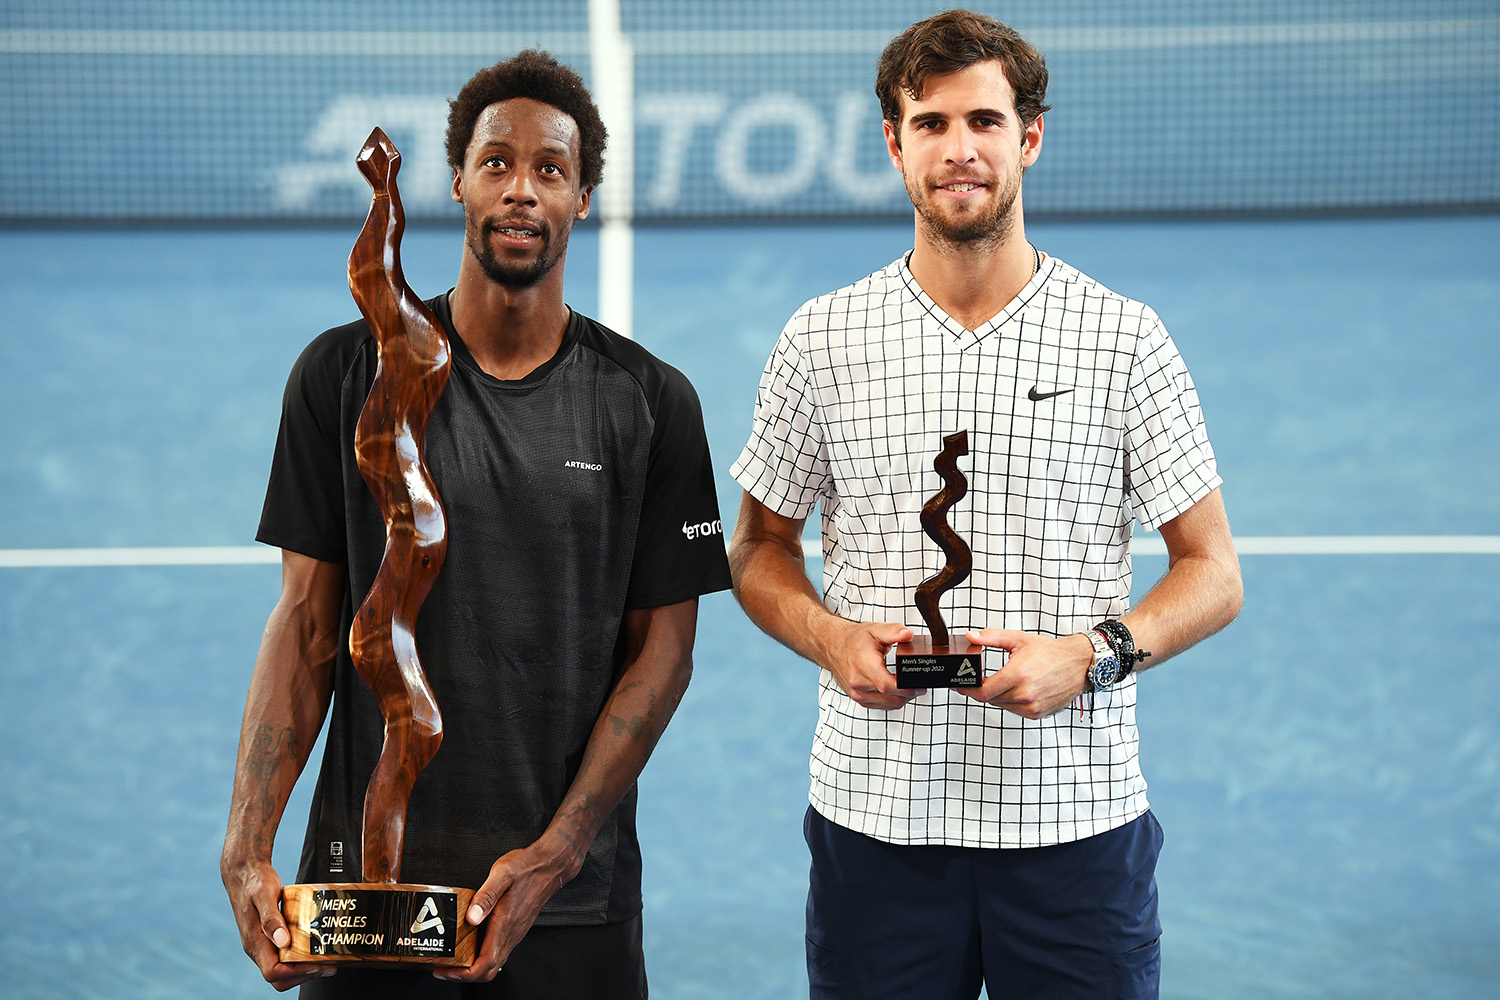 Monfils returns to winner’s circle with Adelaide trophy Adelaide